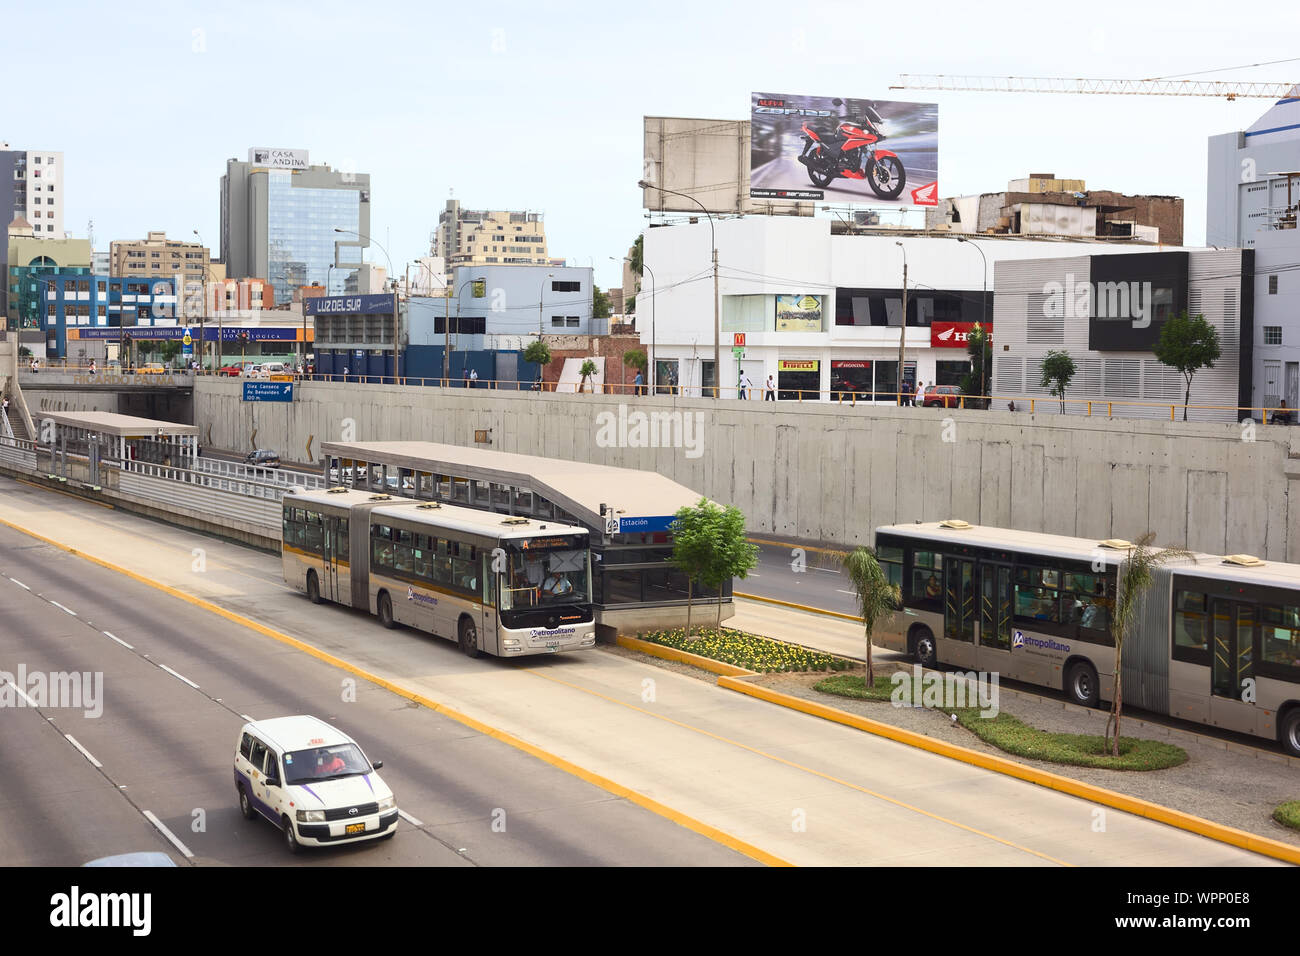 LIMA, PERU - FEBRUARY 13, 2012: Metropolitano bus of the Line A stopping at the crossing of the Avenues Ricardo Palma and Paseo de la Republica Stock Photo